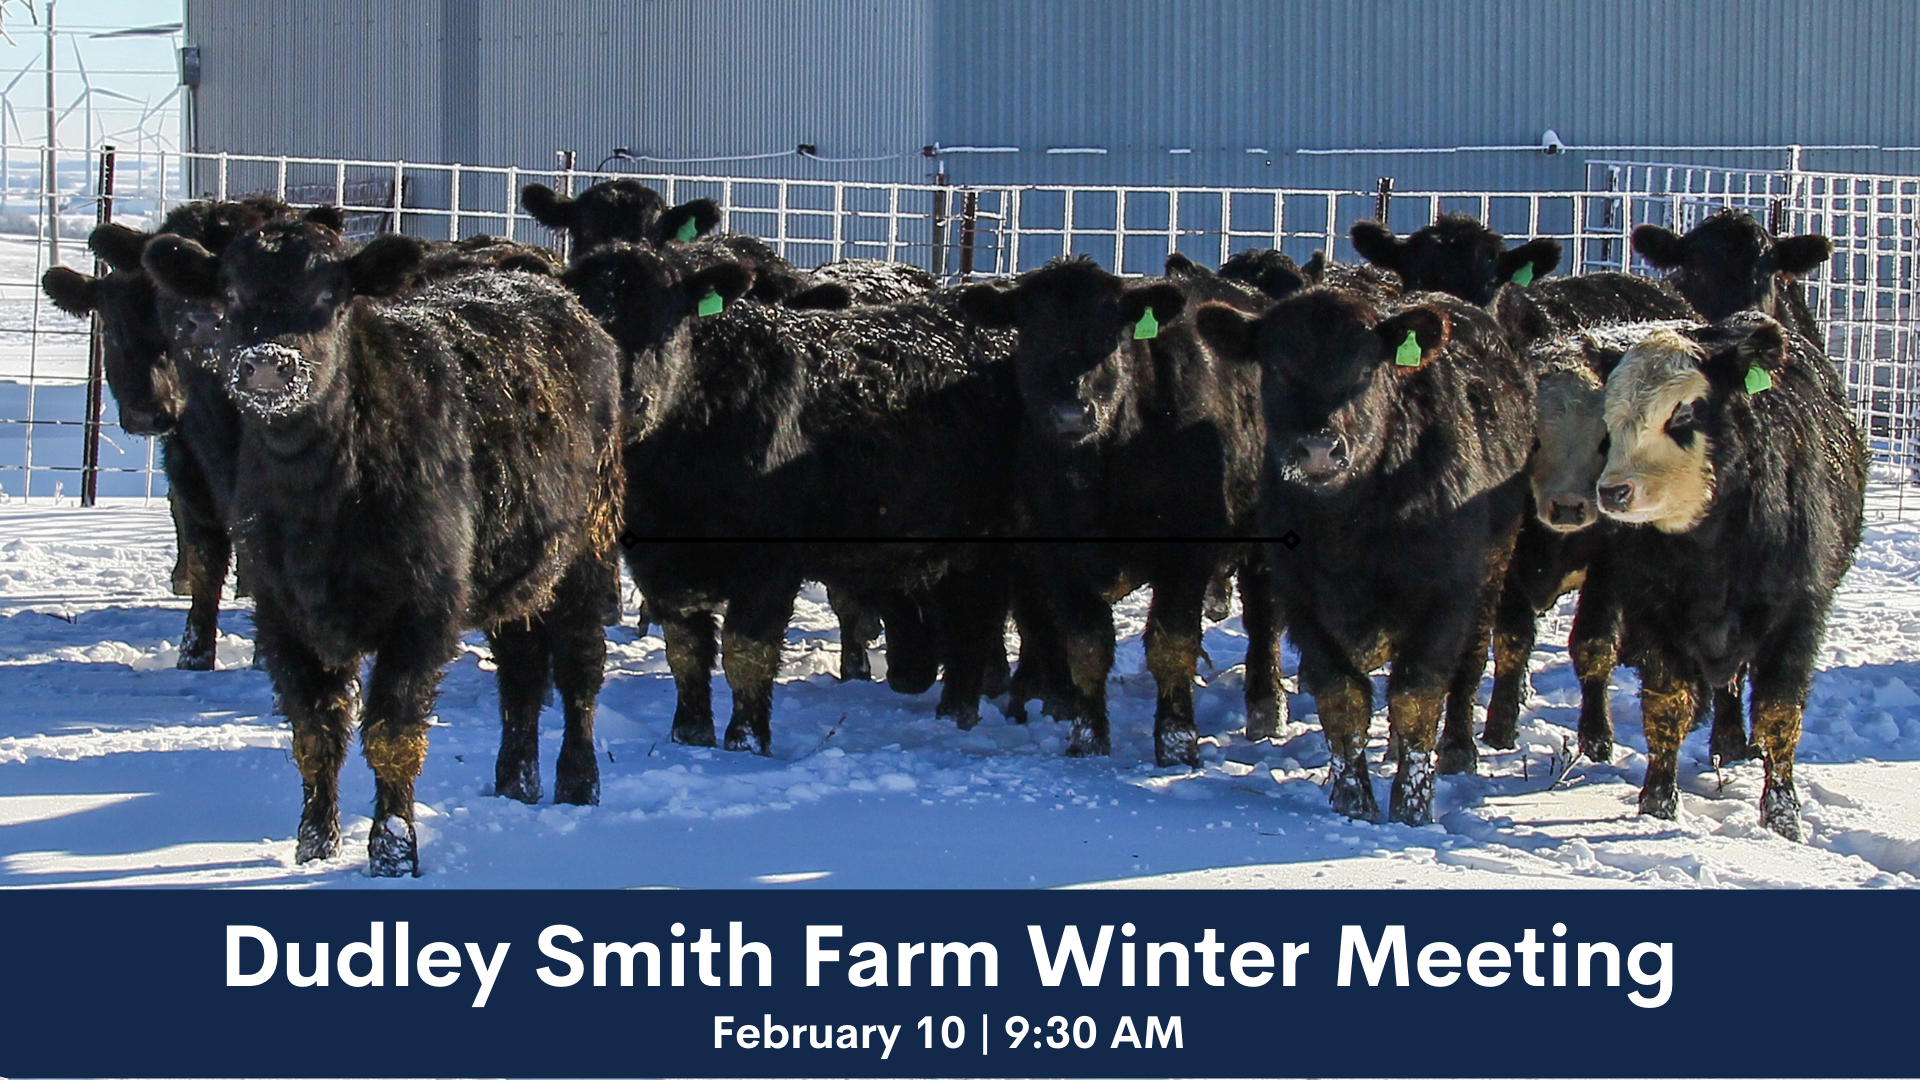 cows in the winter at Dudley Smith Farm